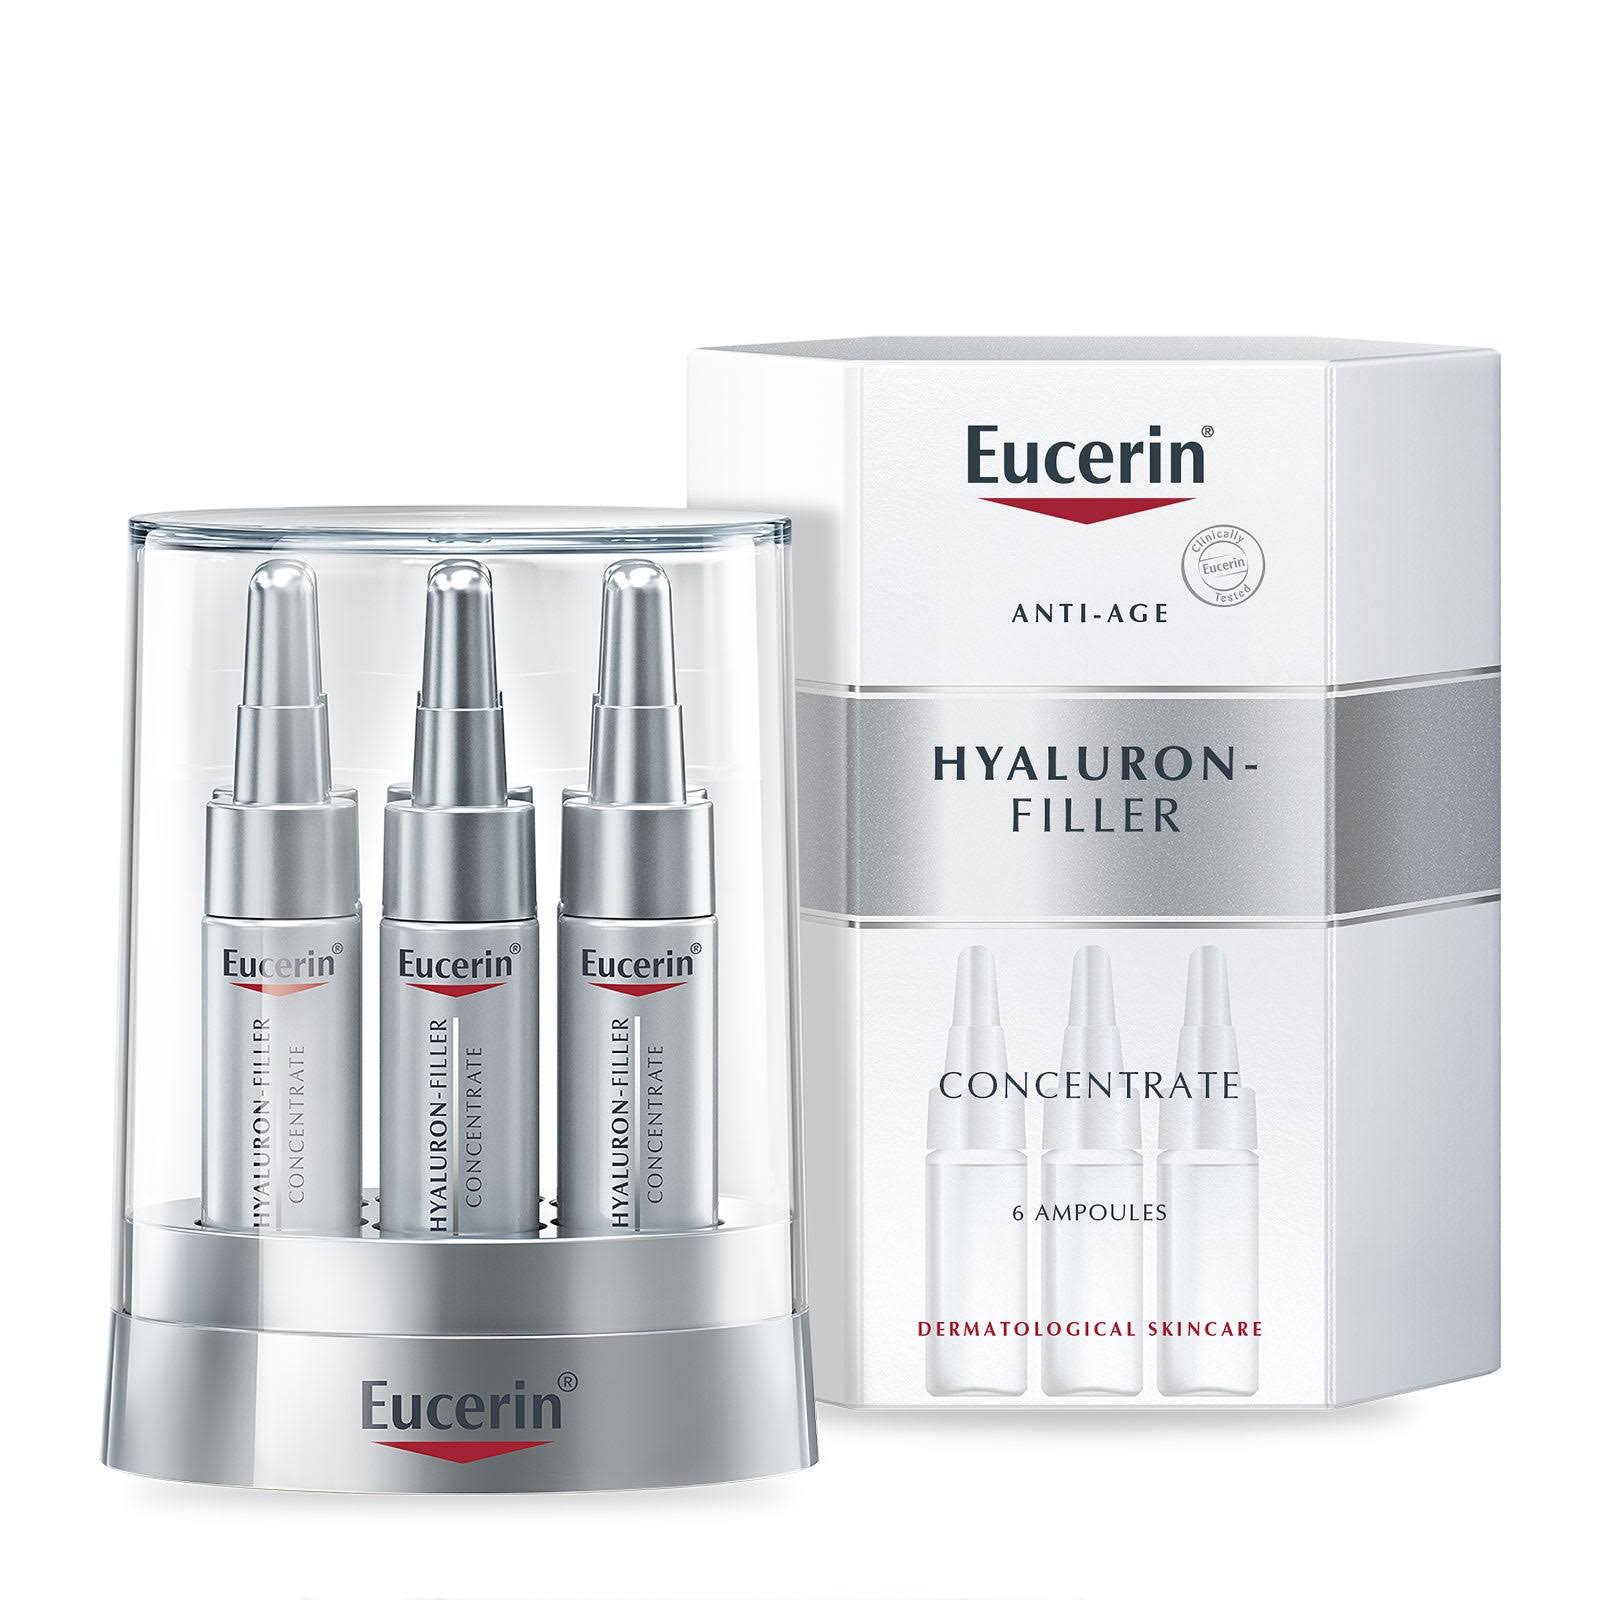 Eucerin Anti-Age Hyaluron-Filler Concentrate